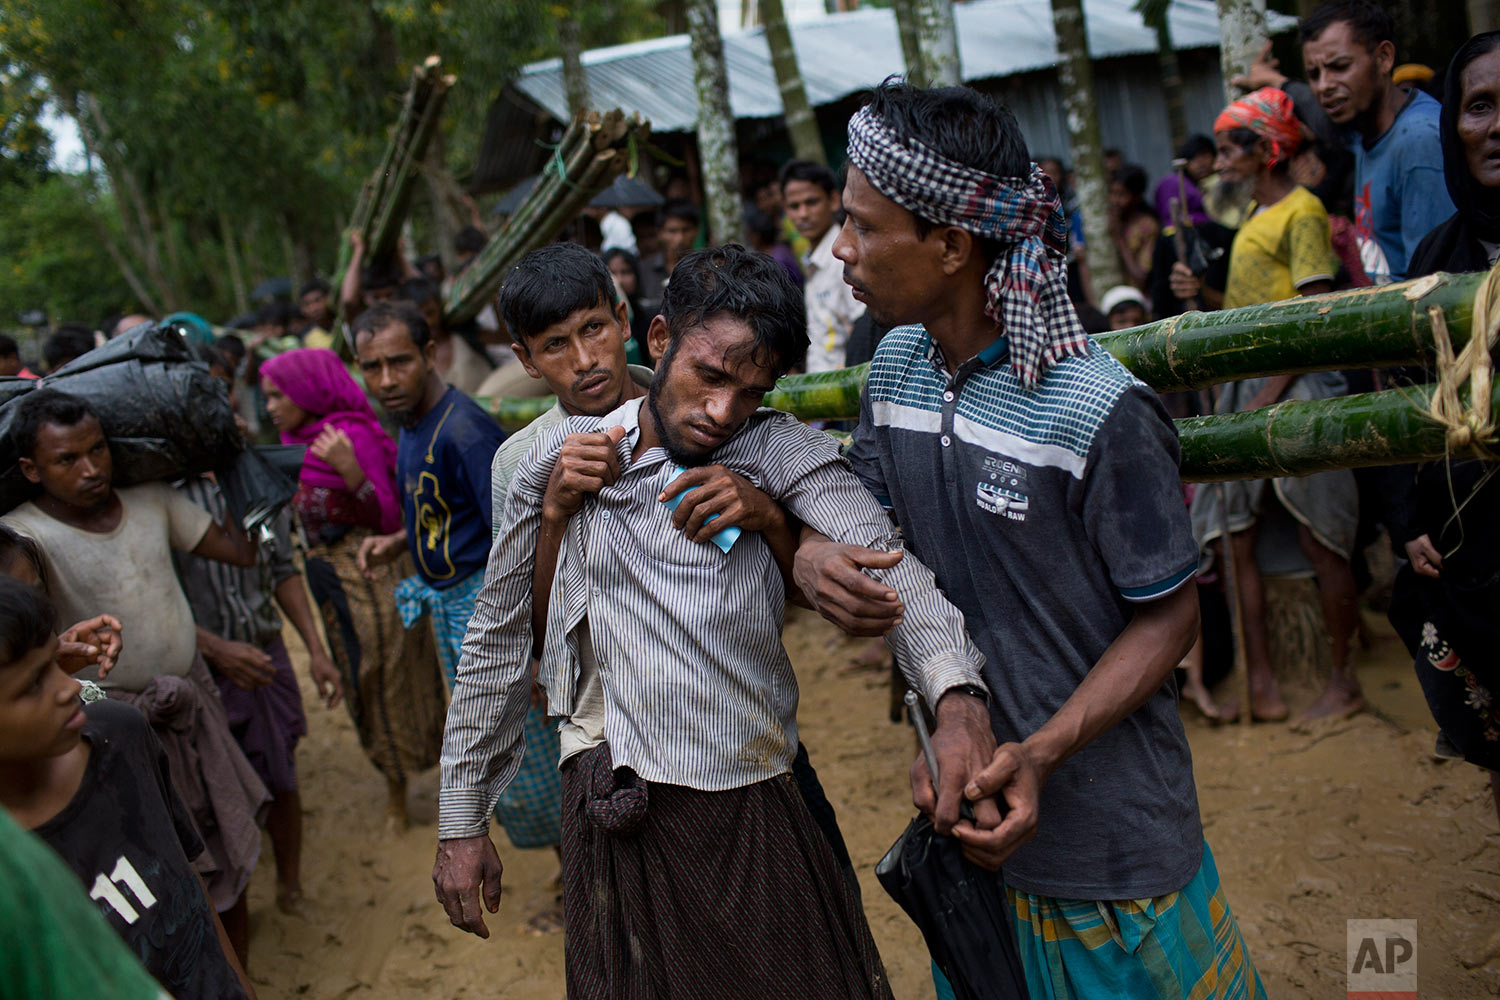 Kifawet Ullah is helped by other newly arrived Rohingya after he collapsed while waiting to have his token validated in order to collect a bag of rice distributed by aid agencies in Kutupalong, Bangladesh, Saturday, Sept. 9, 2017. (AP Photo/Bernat Armangue)